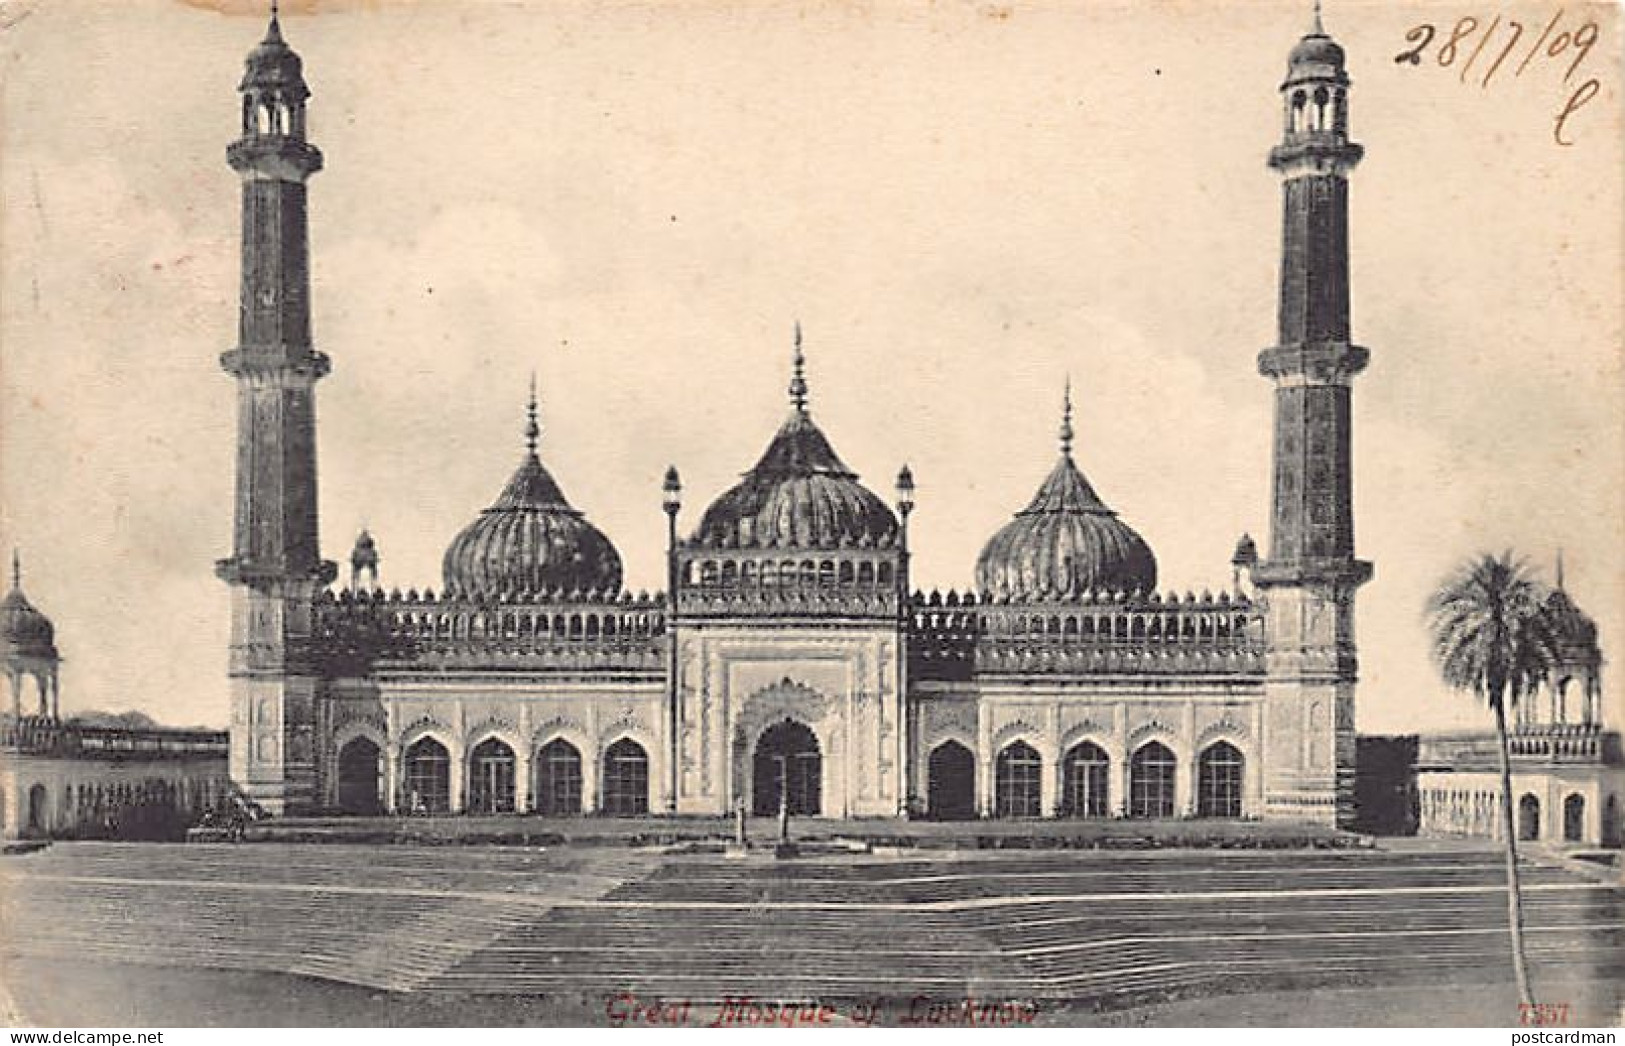 India - LUCKNOW - Great Mosque - Inde